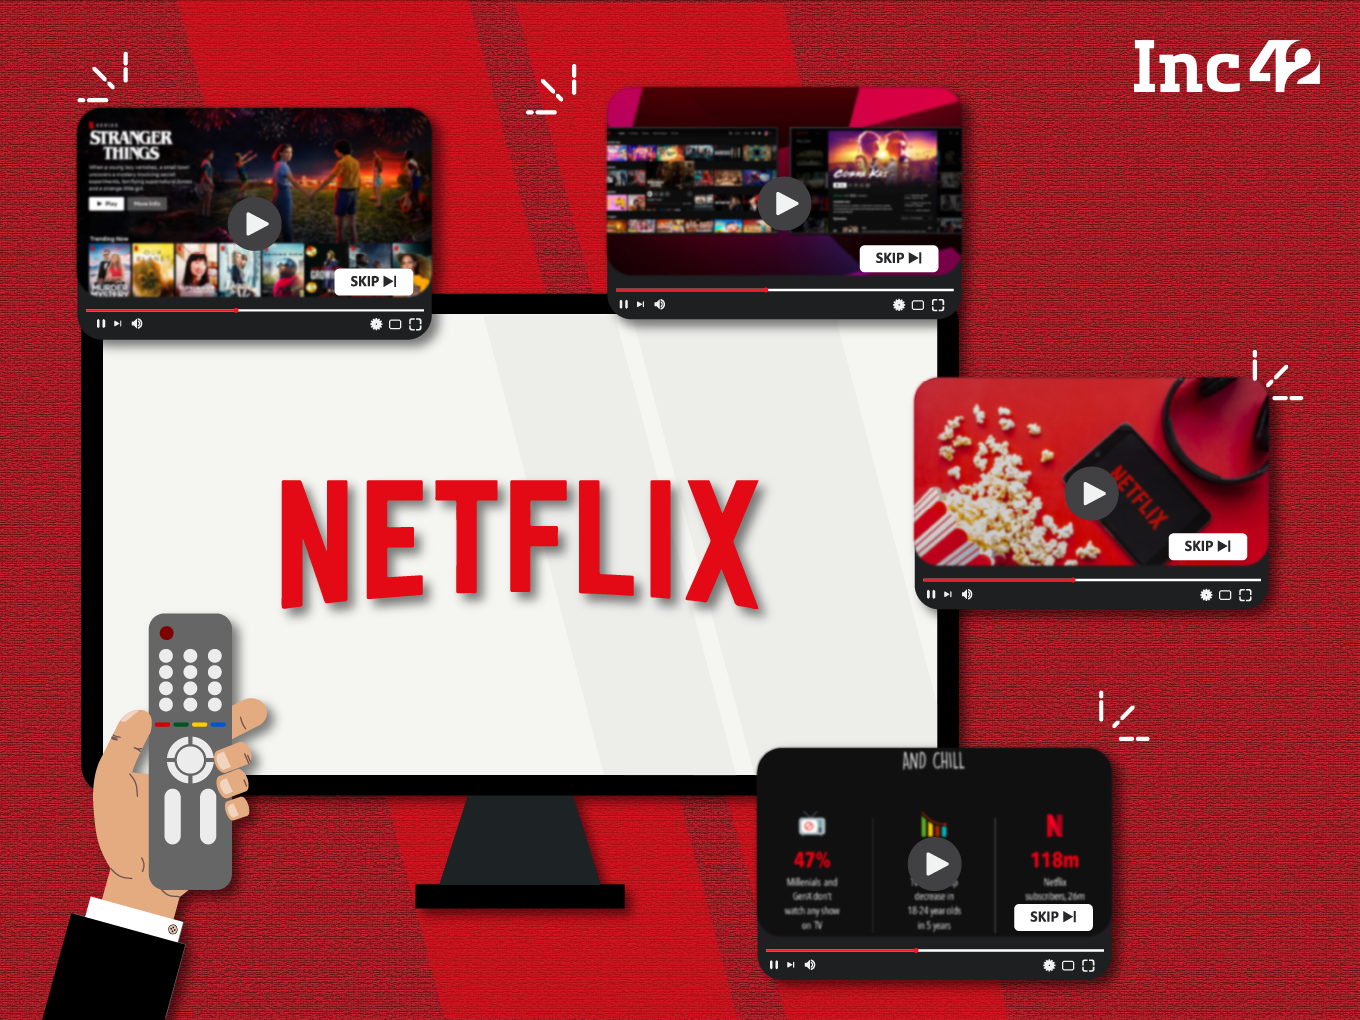 Can Ad-Supported Model Help Netflix Find Its Way In Indian OTT Market?